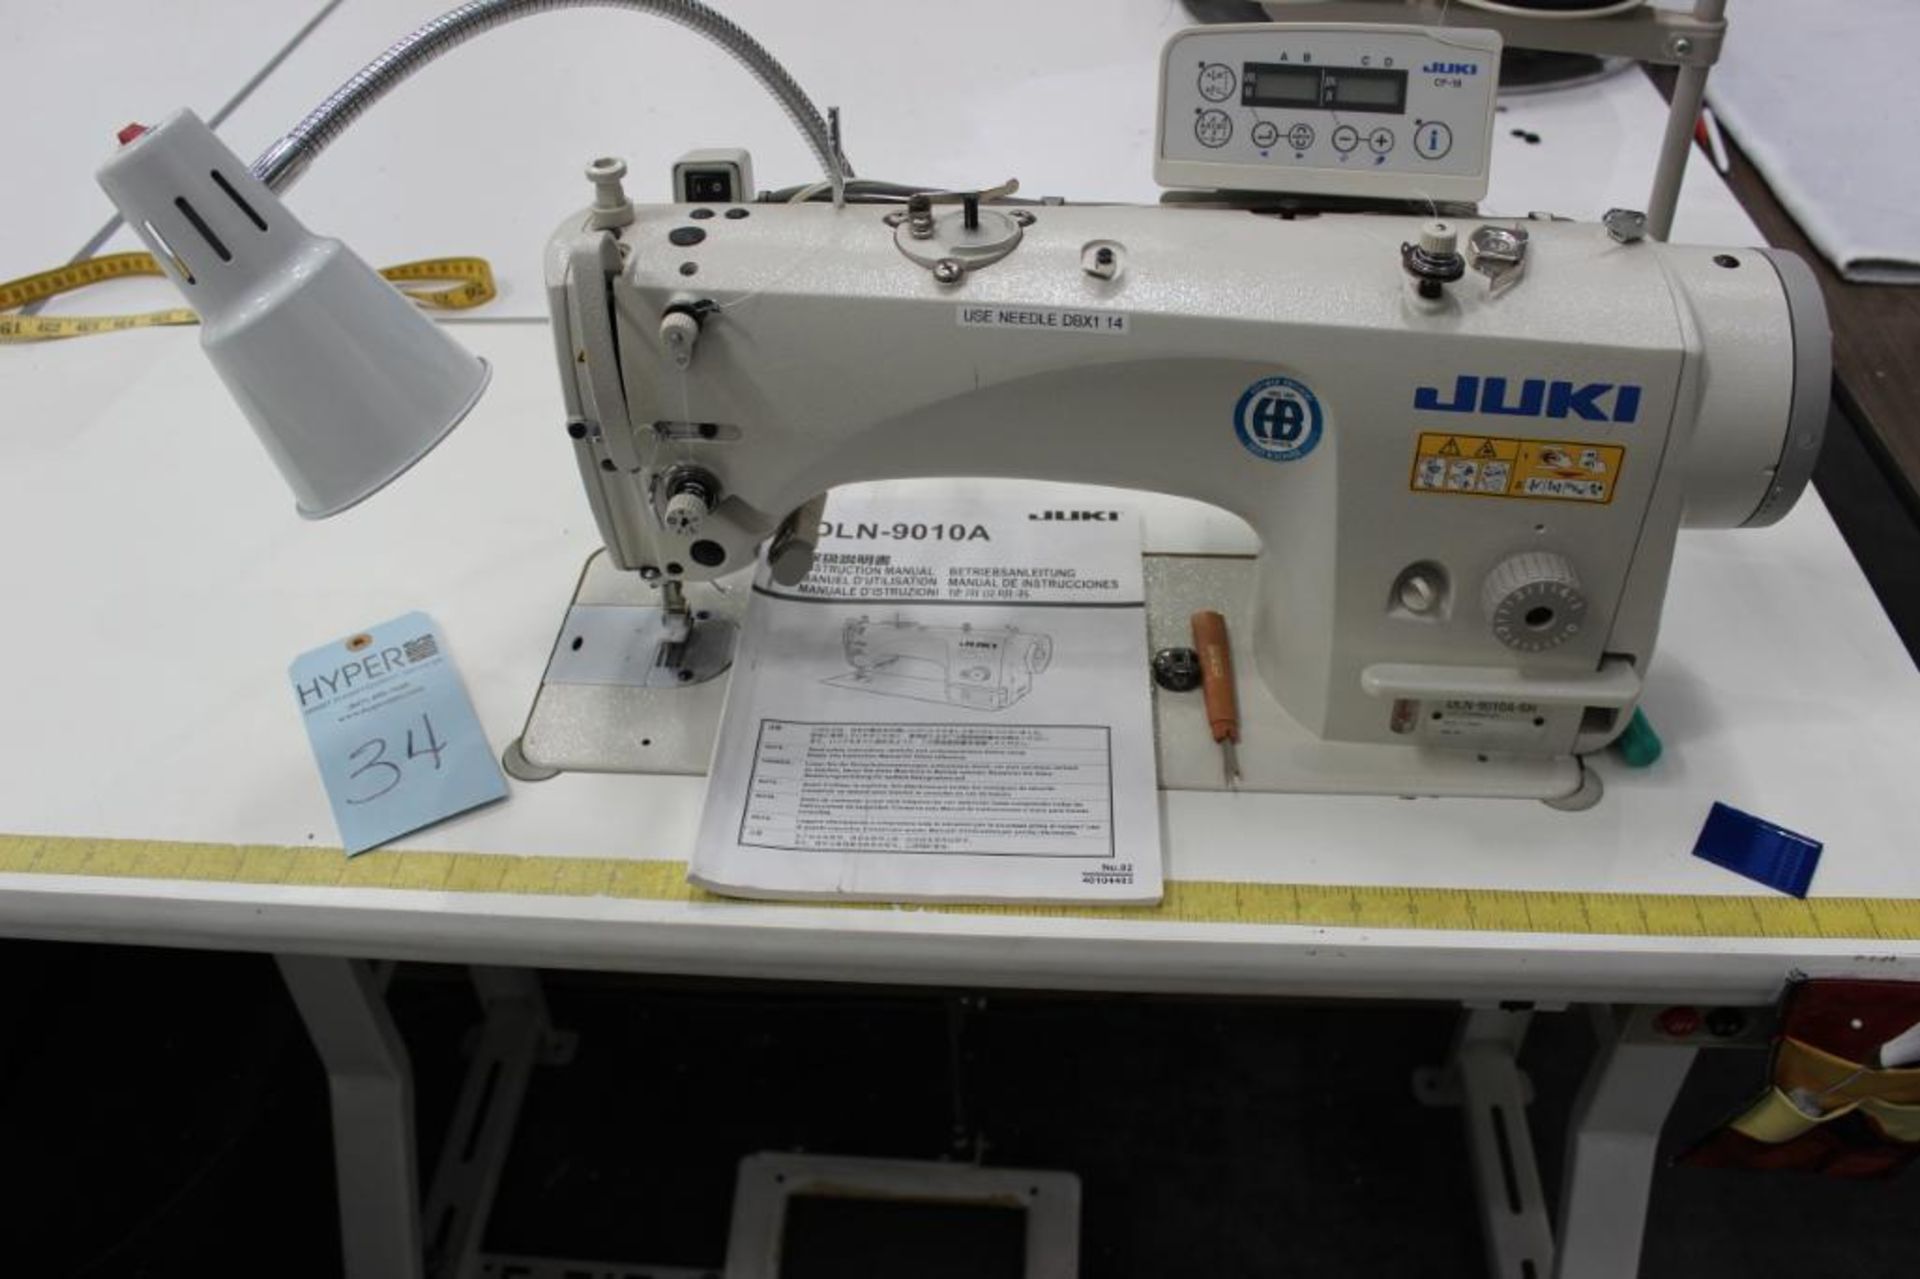 Juki model DLN-9010A-SH sewing machine s/n 2D31000018 w/Sewing Table